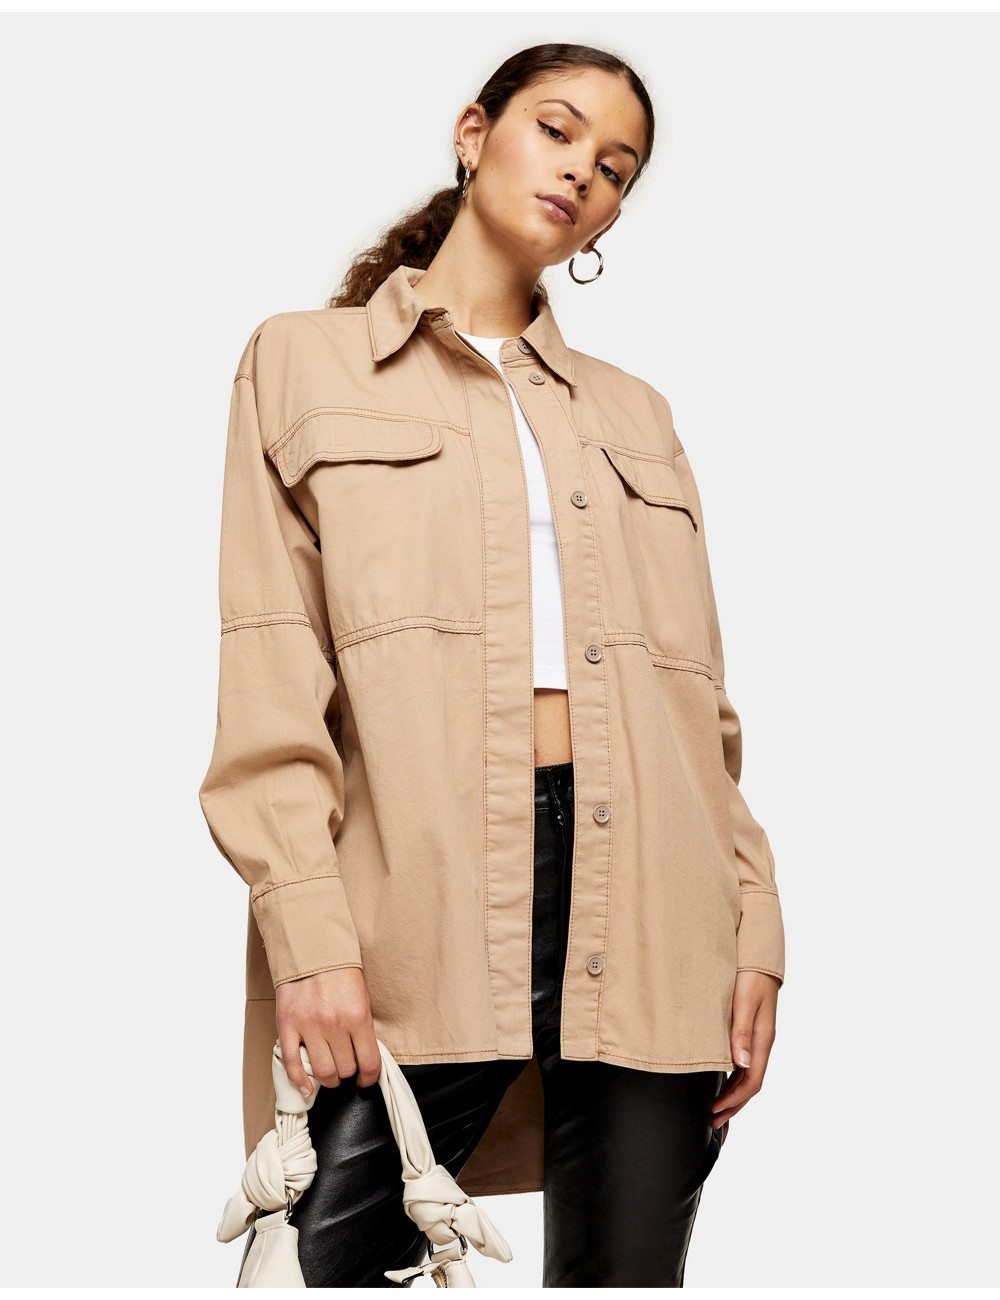 Topshop casual shirt in camel